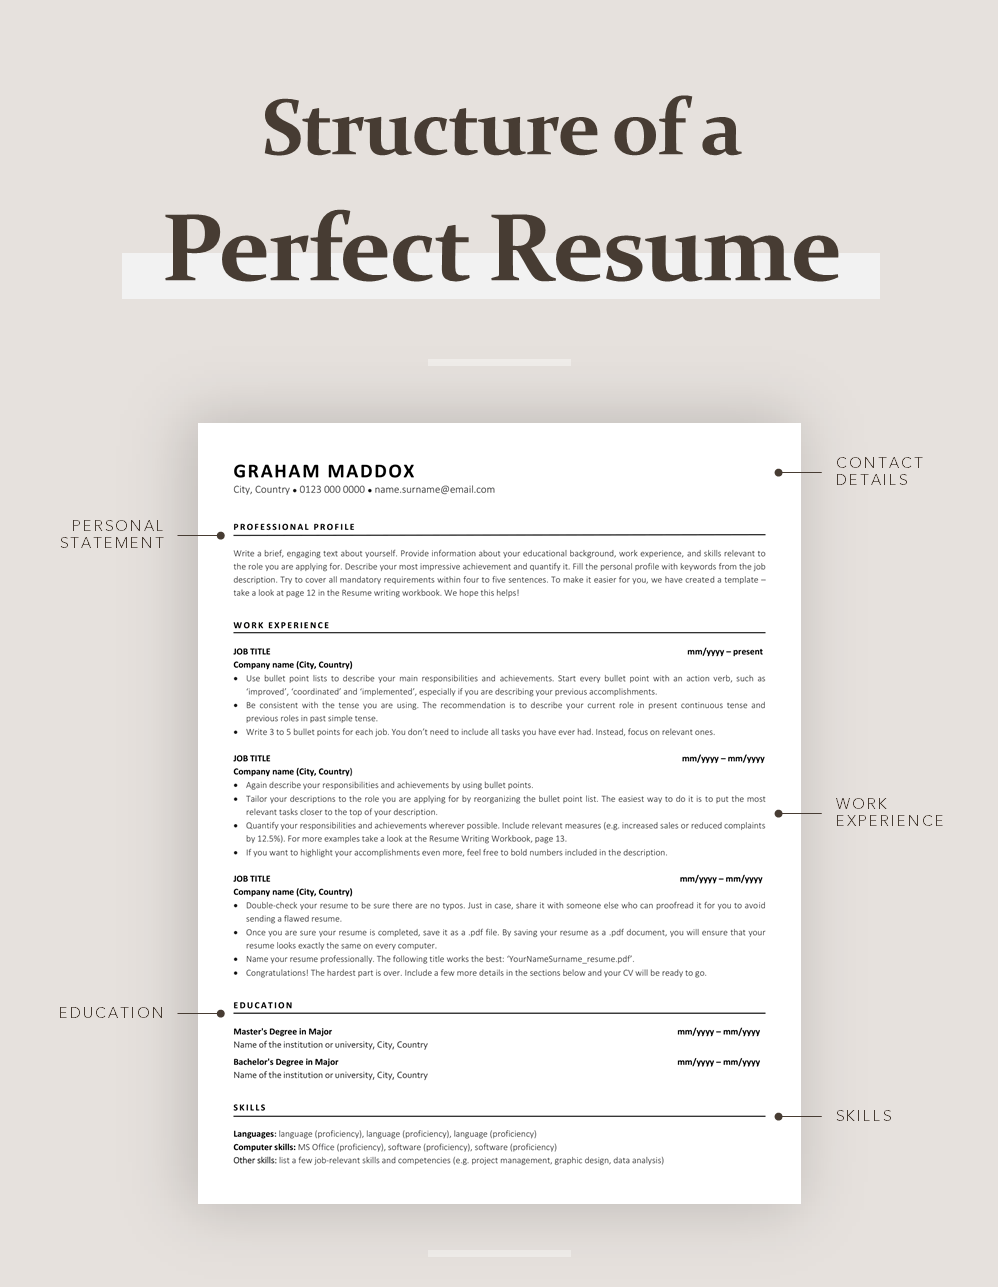 Resume Stucture